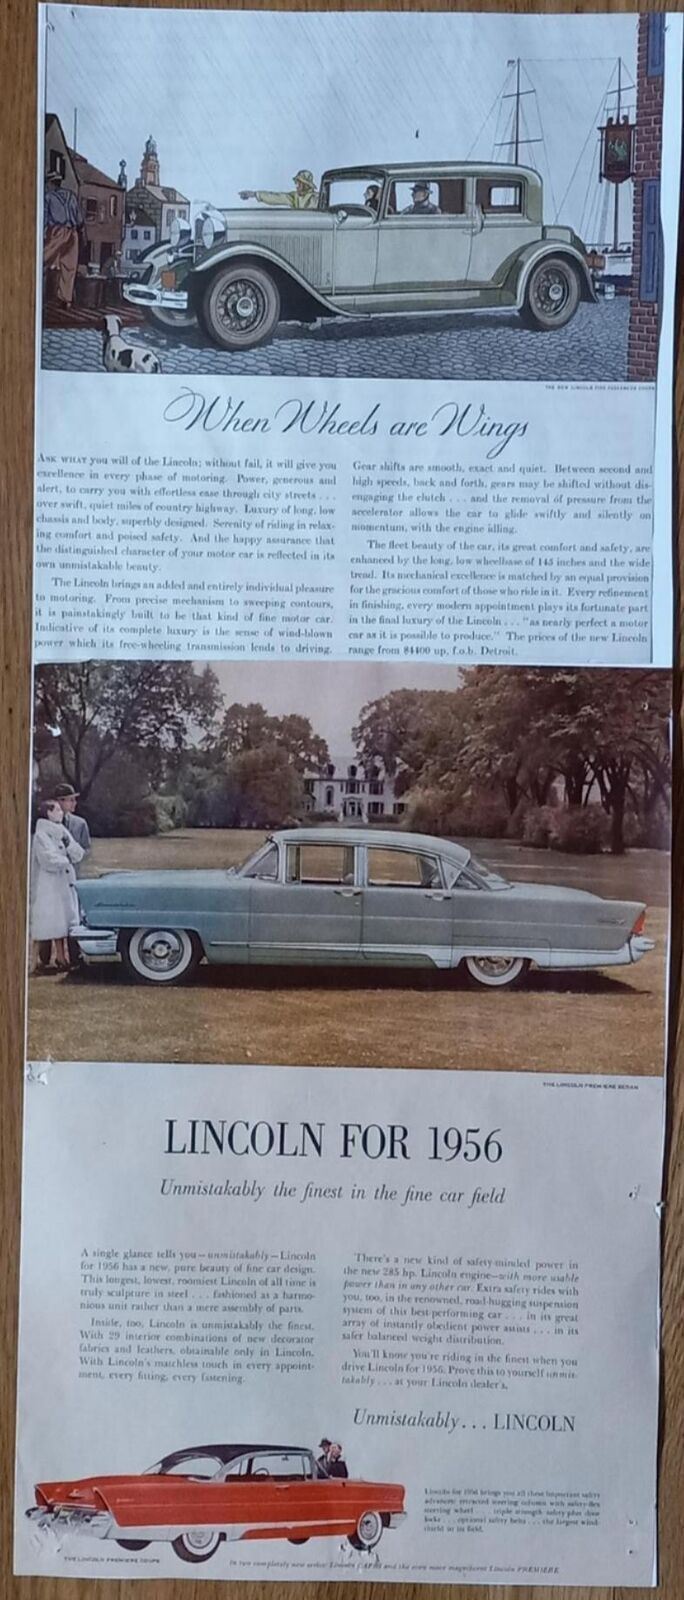 1956 LINCOLN PREMIERE WHEELS ARE WINGS DOUBLE PAGE PRINT AD VINTAGE ADVERTISMENT